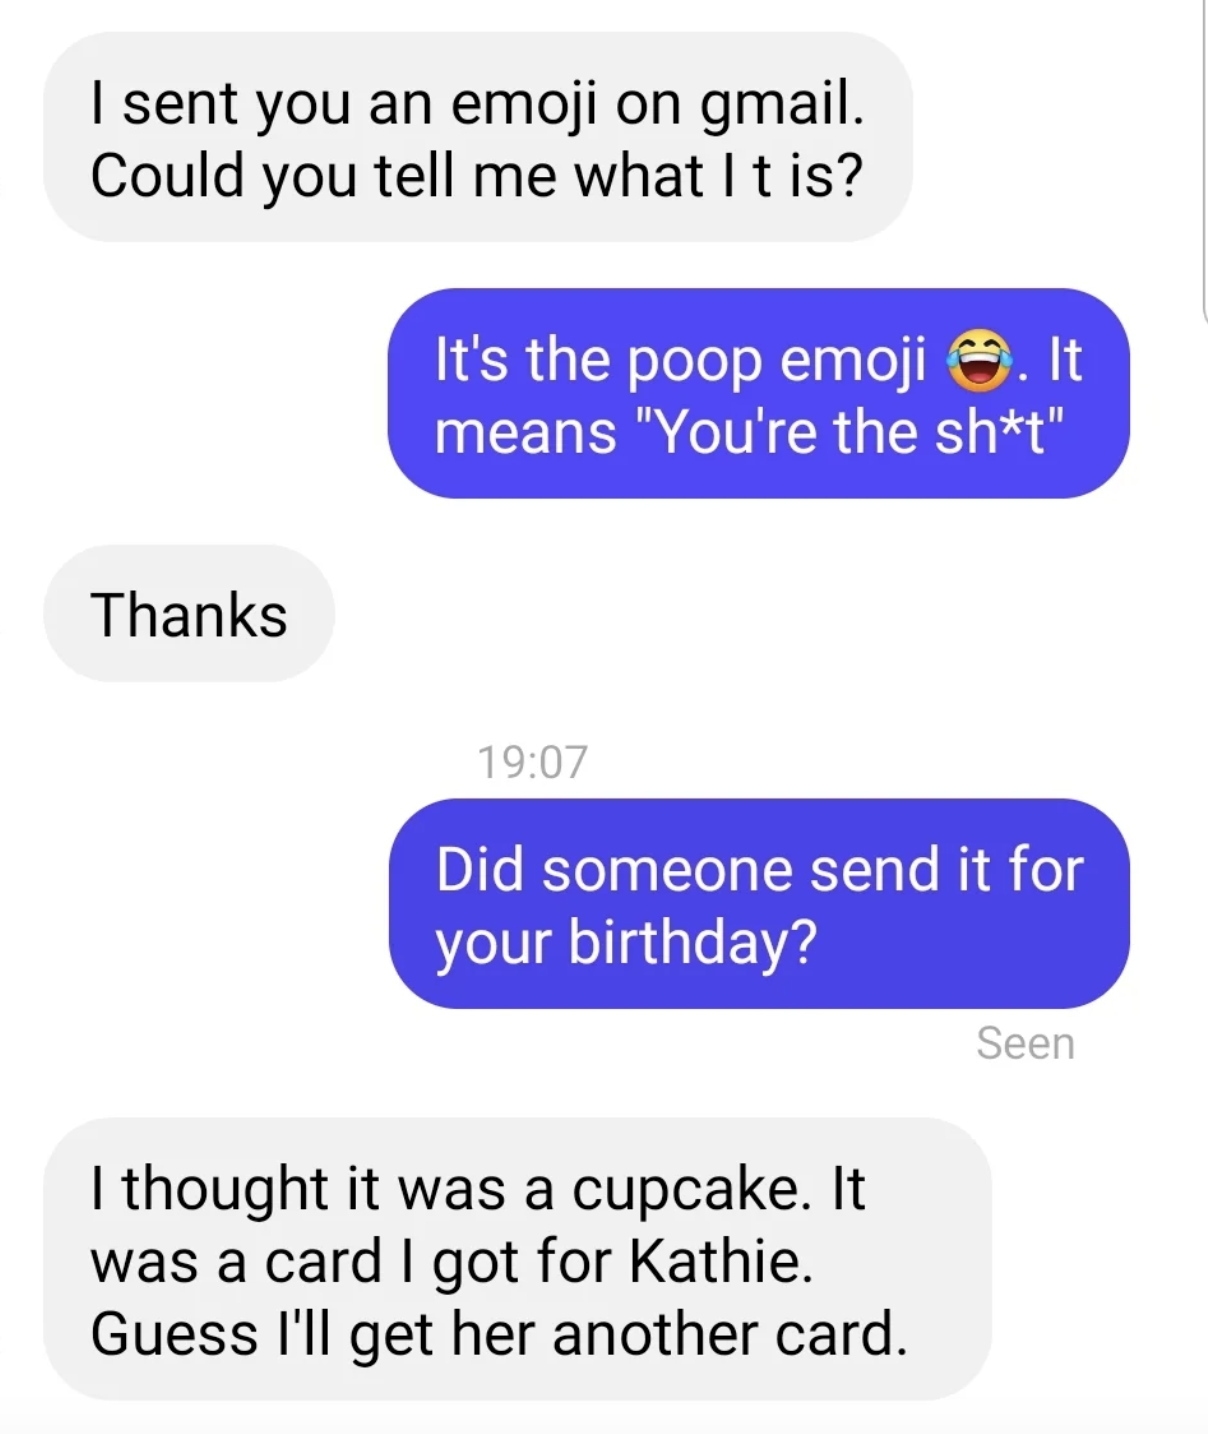 Person thought the poop emoji was a cupcake and got it as a card for someone